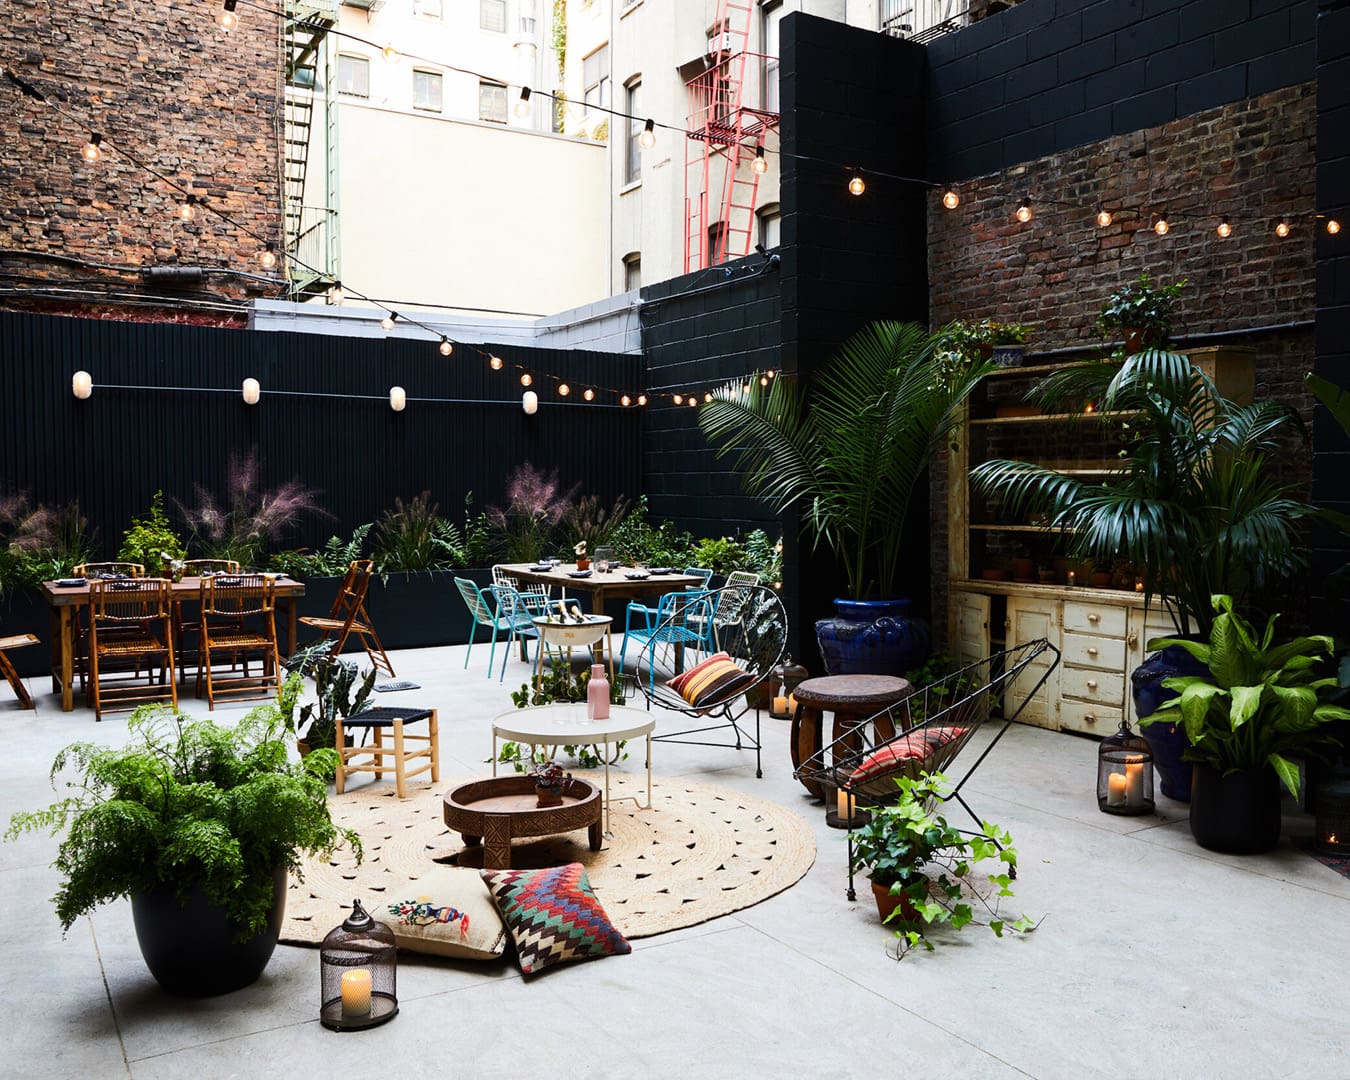 The tropical-style courtyard at Wayla in Lower East Side, NYC